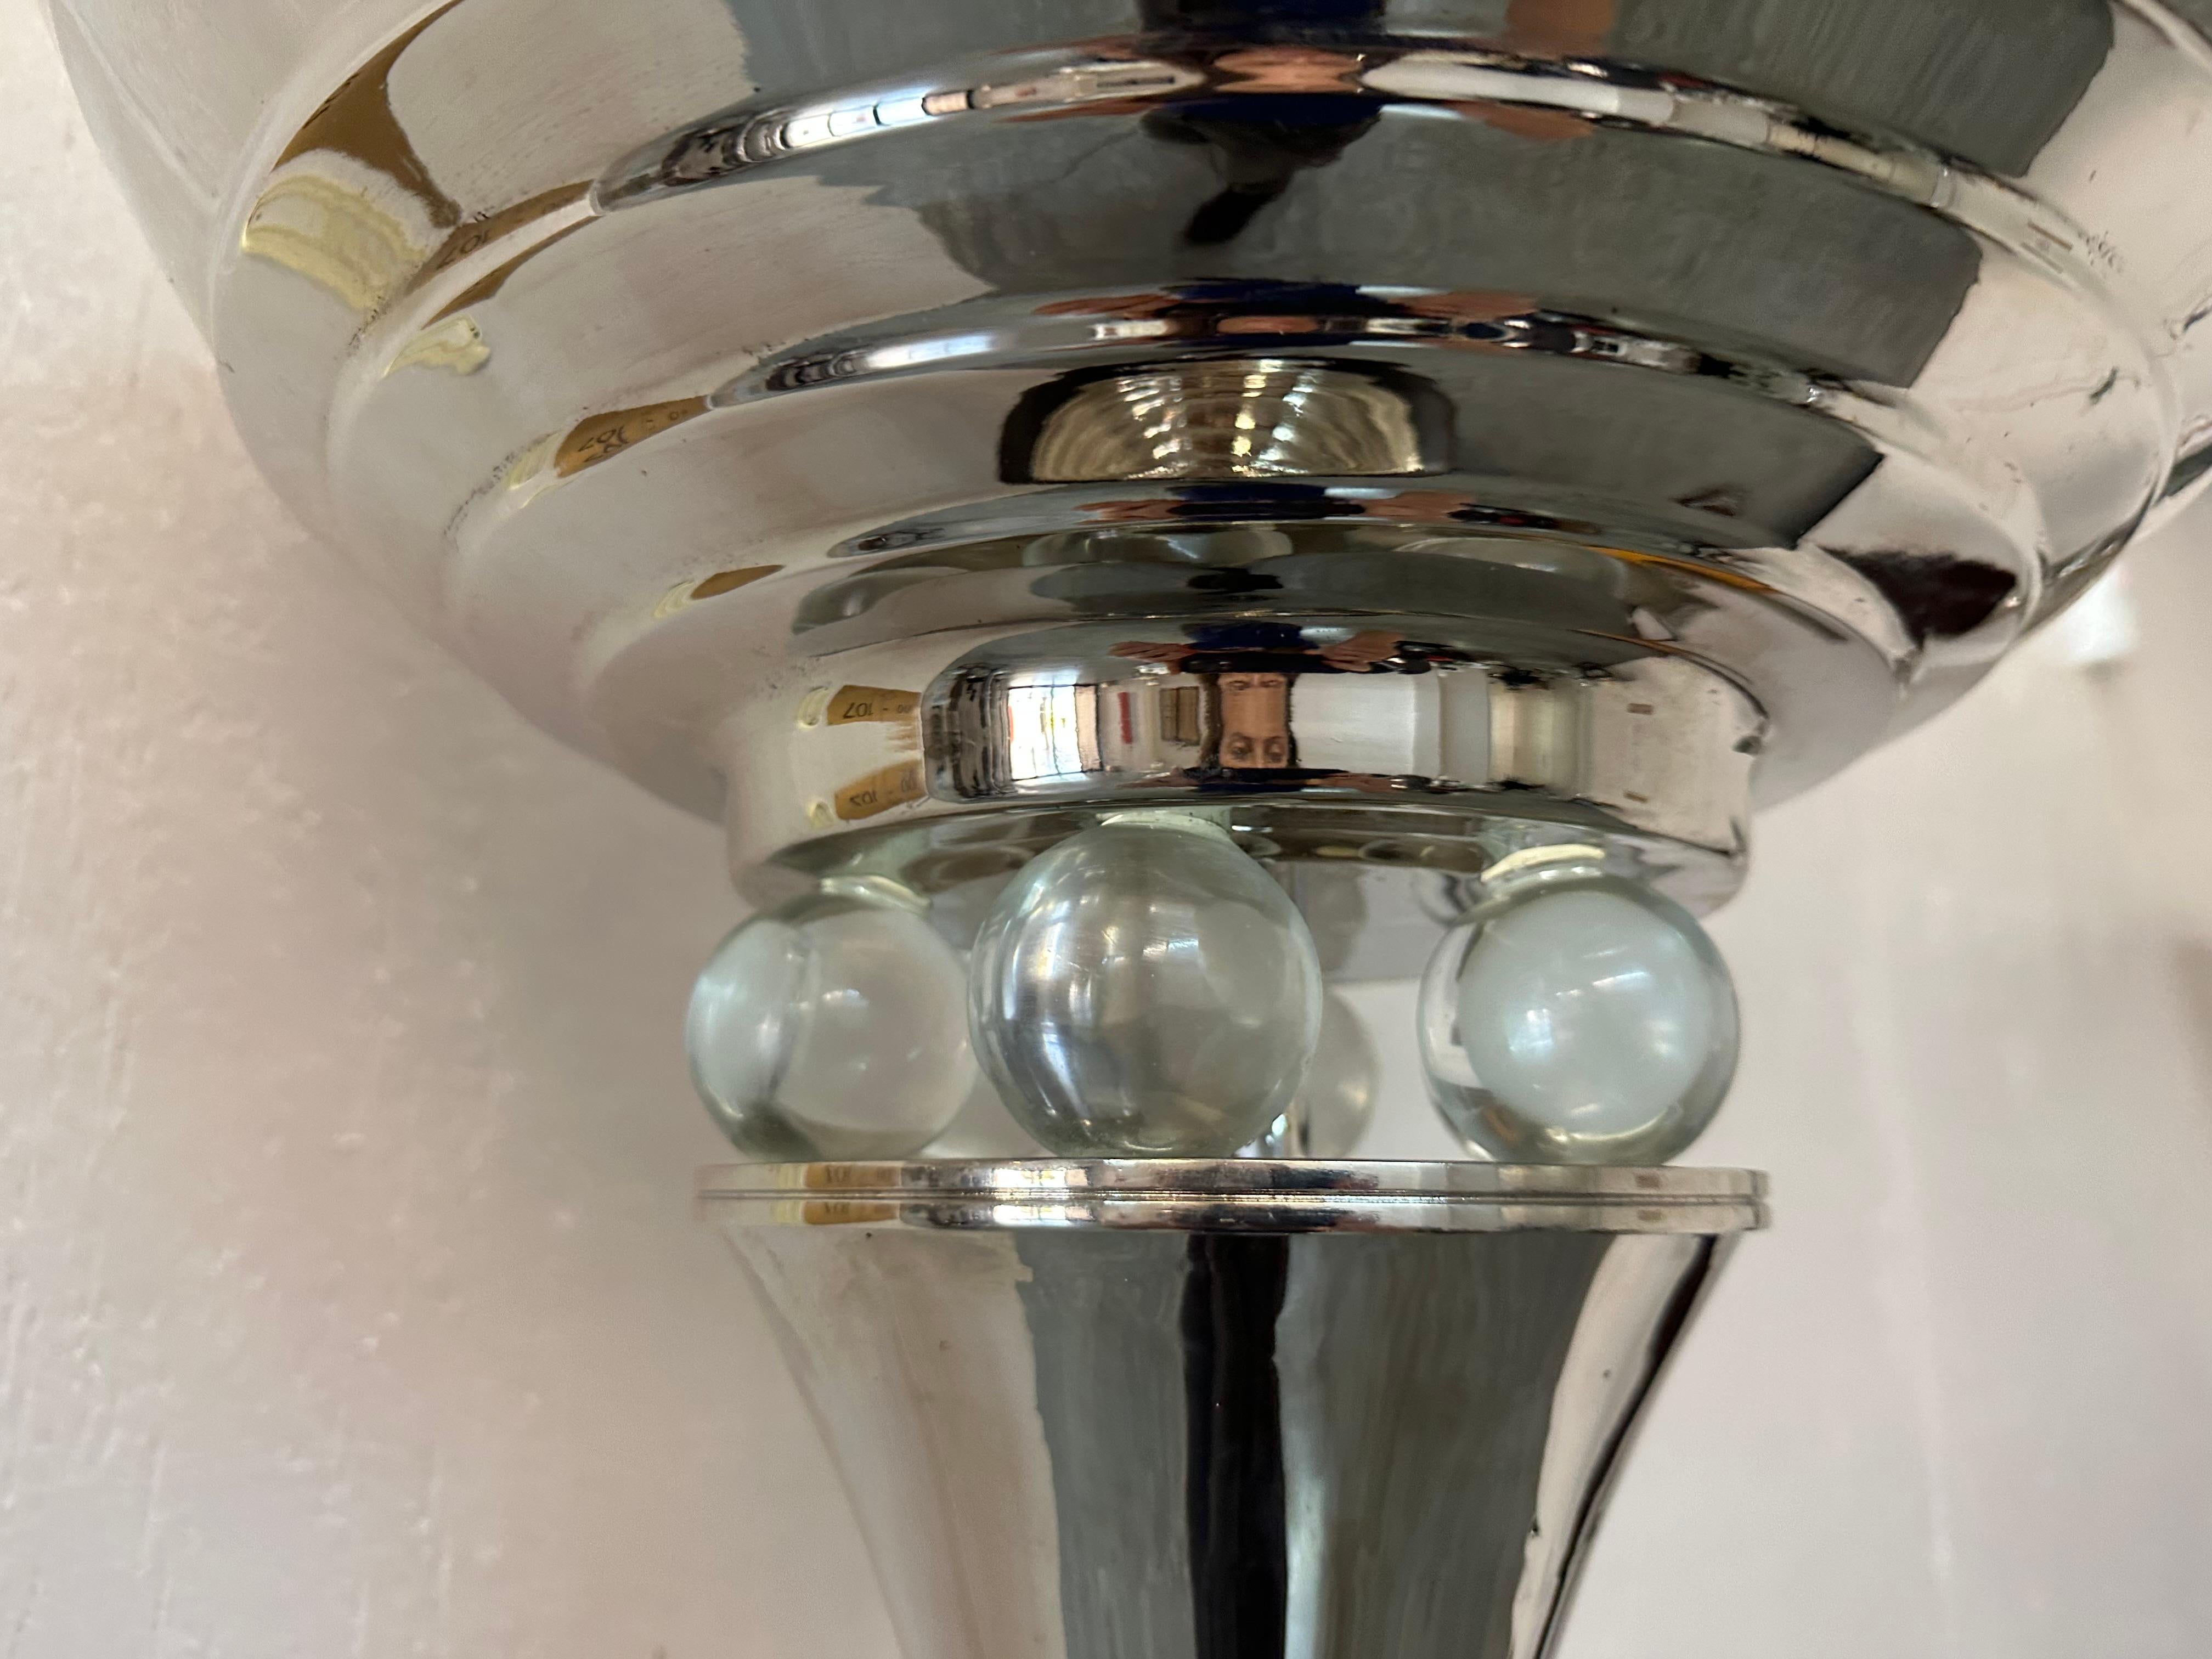 Pair of Art Deco Floor Lamps, France, Materials: Wood and Chrome, 1930 For Sale 15